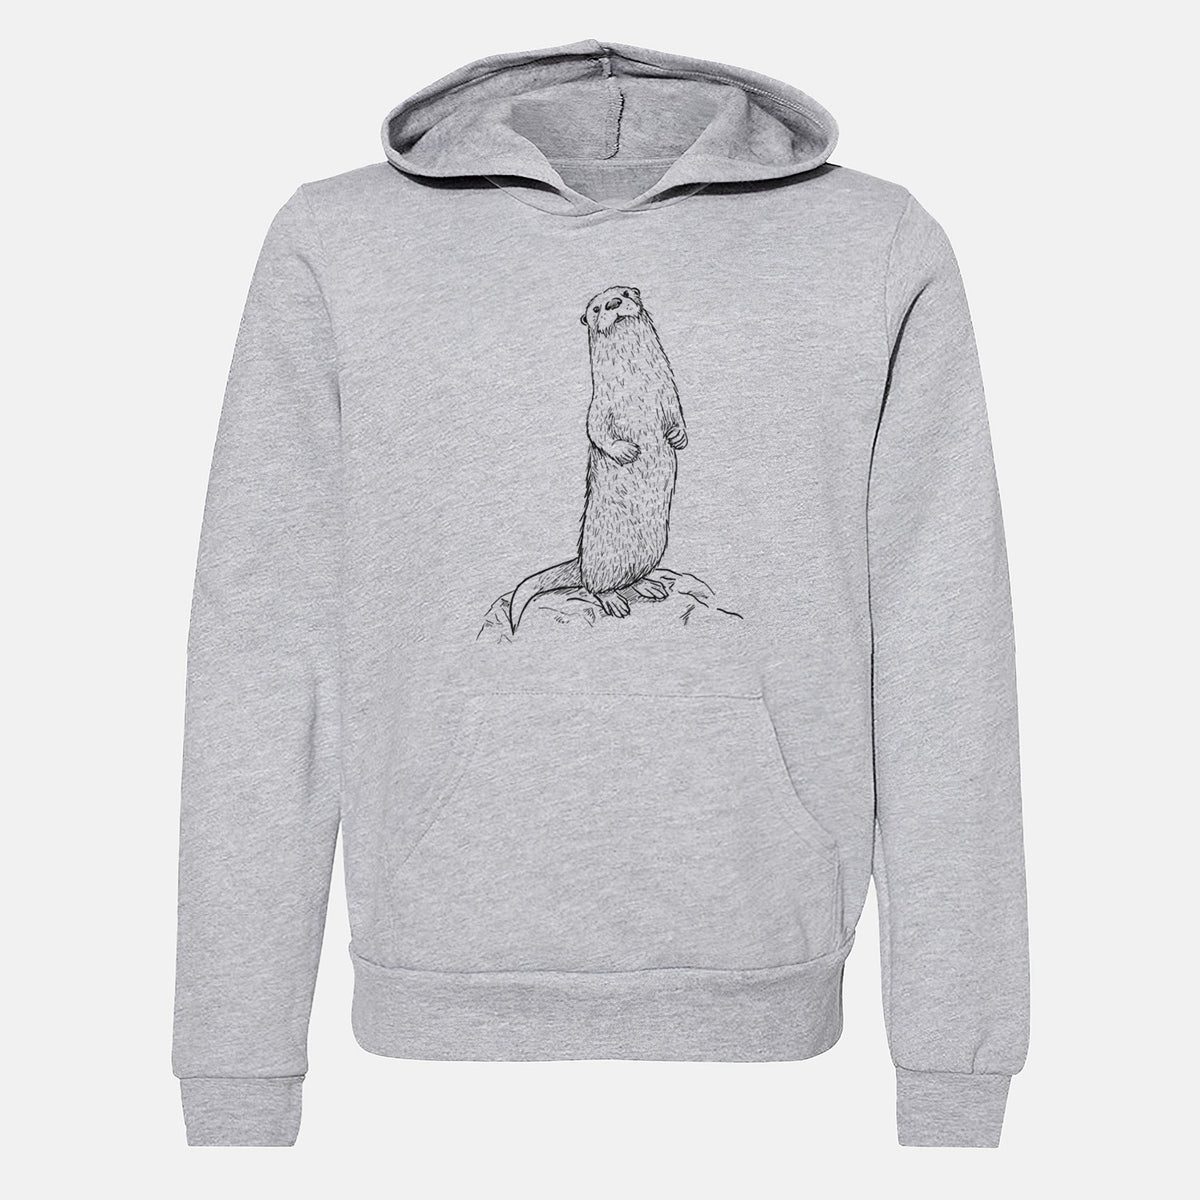 North American River Otter - Lontra canadensis - Youth Hoodie Sweatshirt